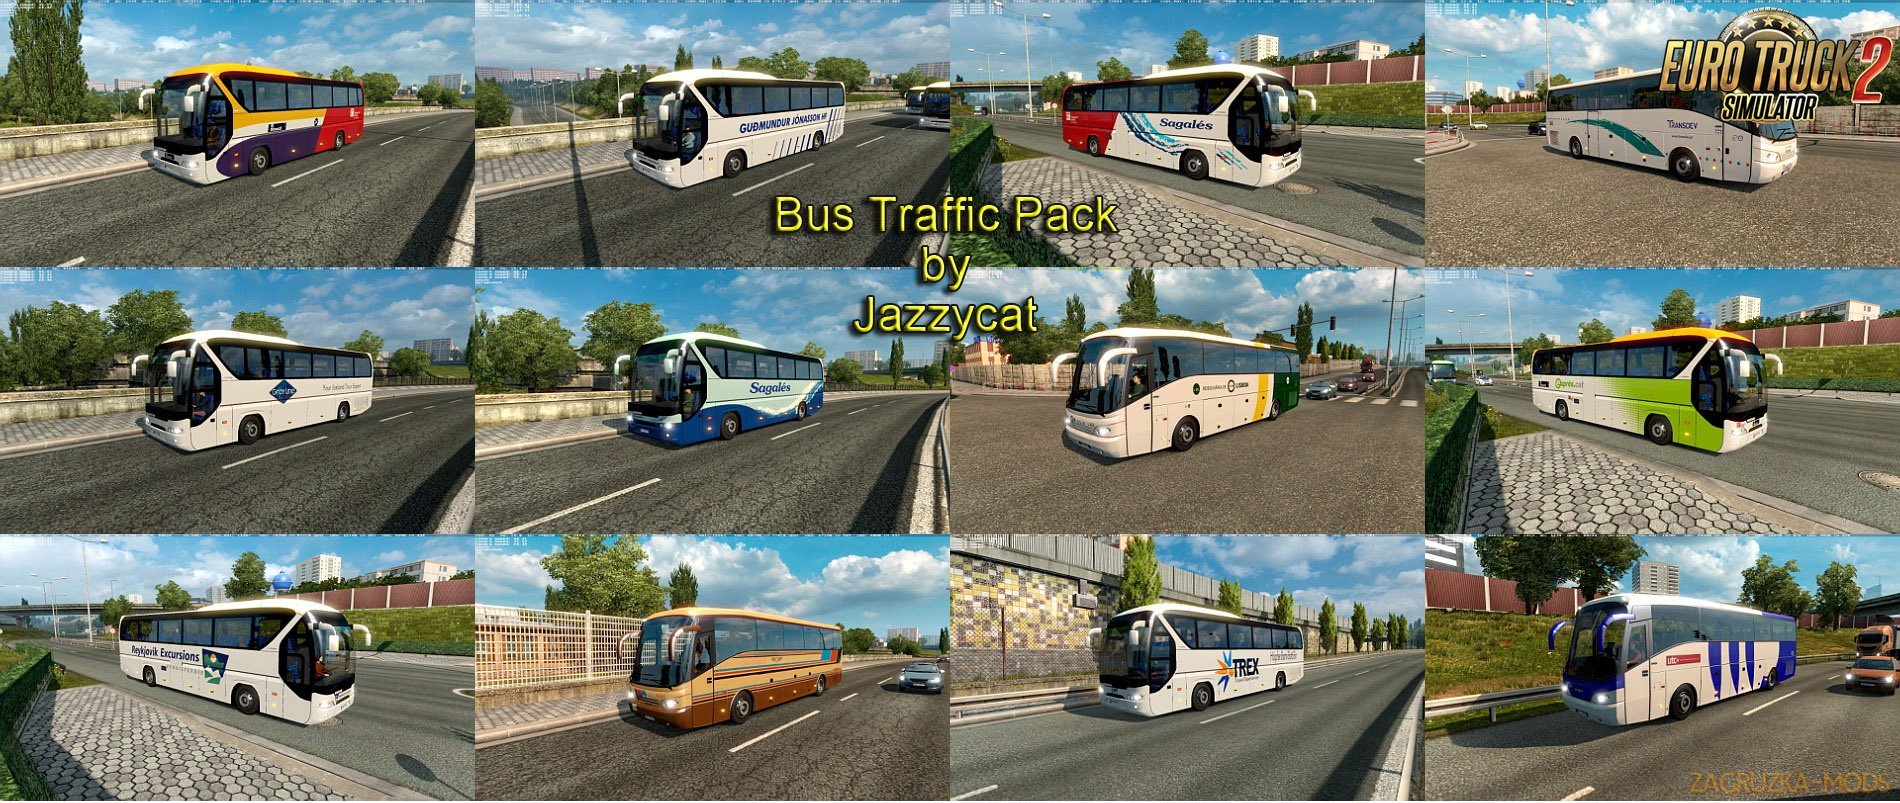 Bus Traffic Pack v1.9 by Jazzycat [1.27.x]